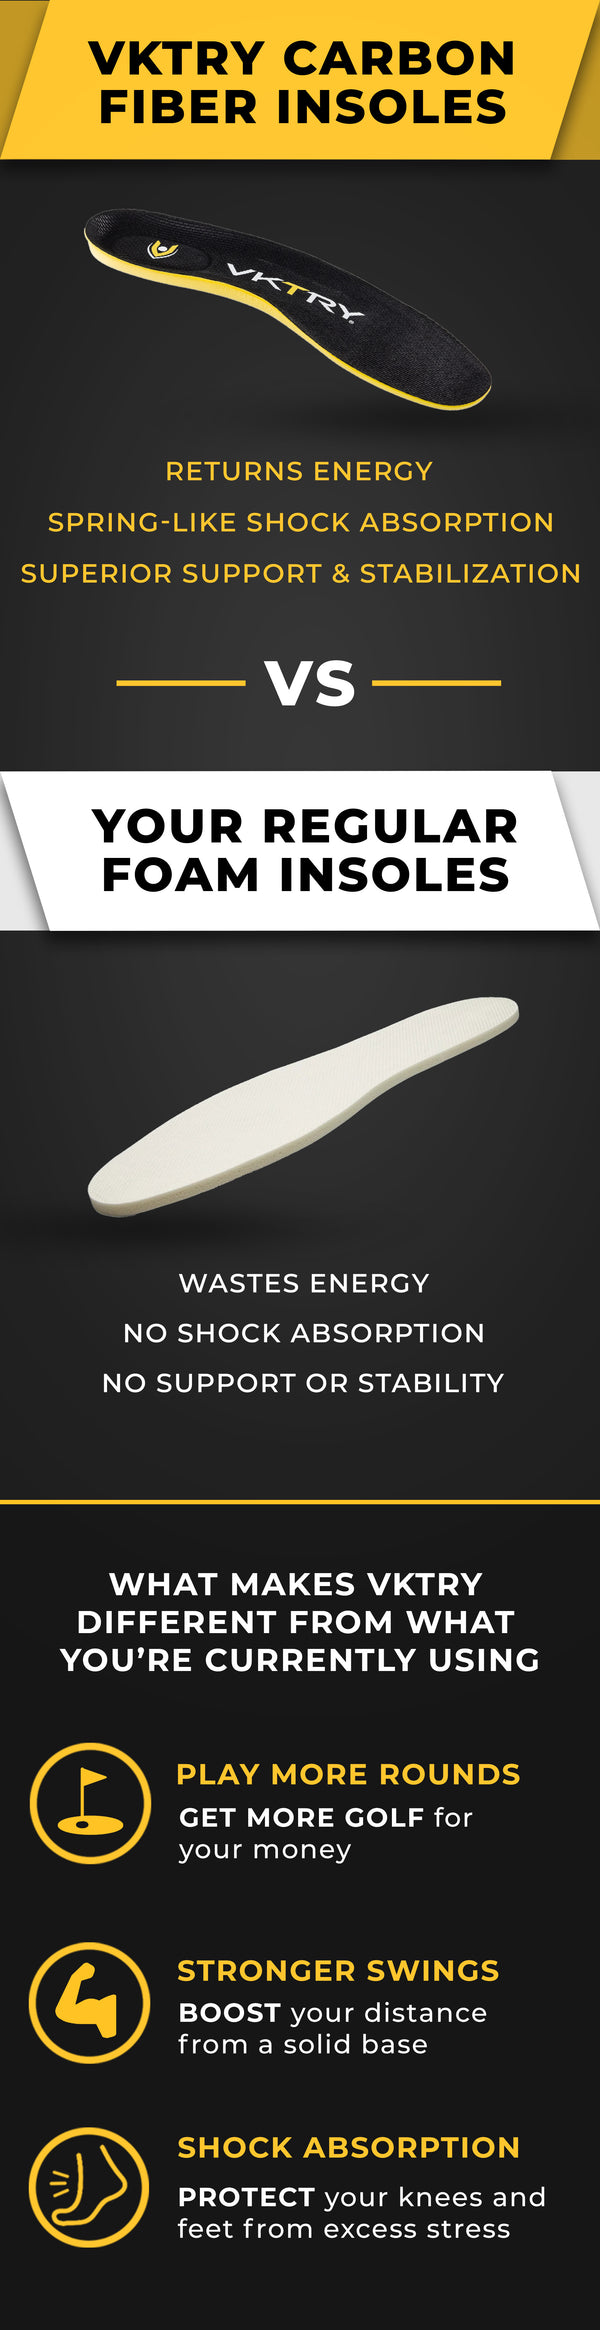 a white insoles on a black background